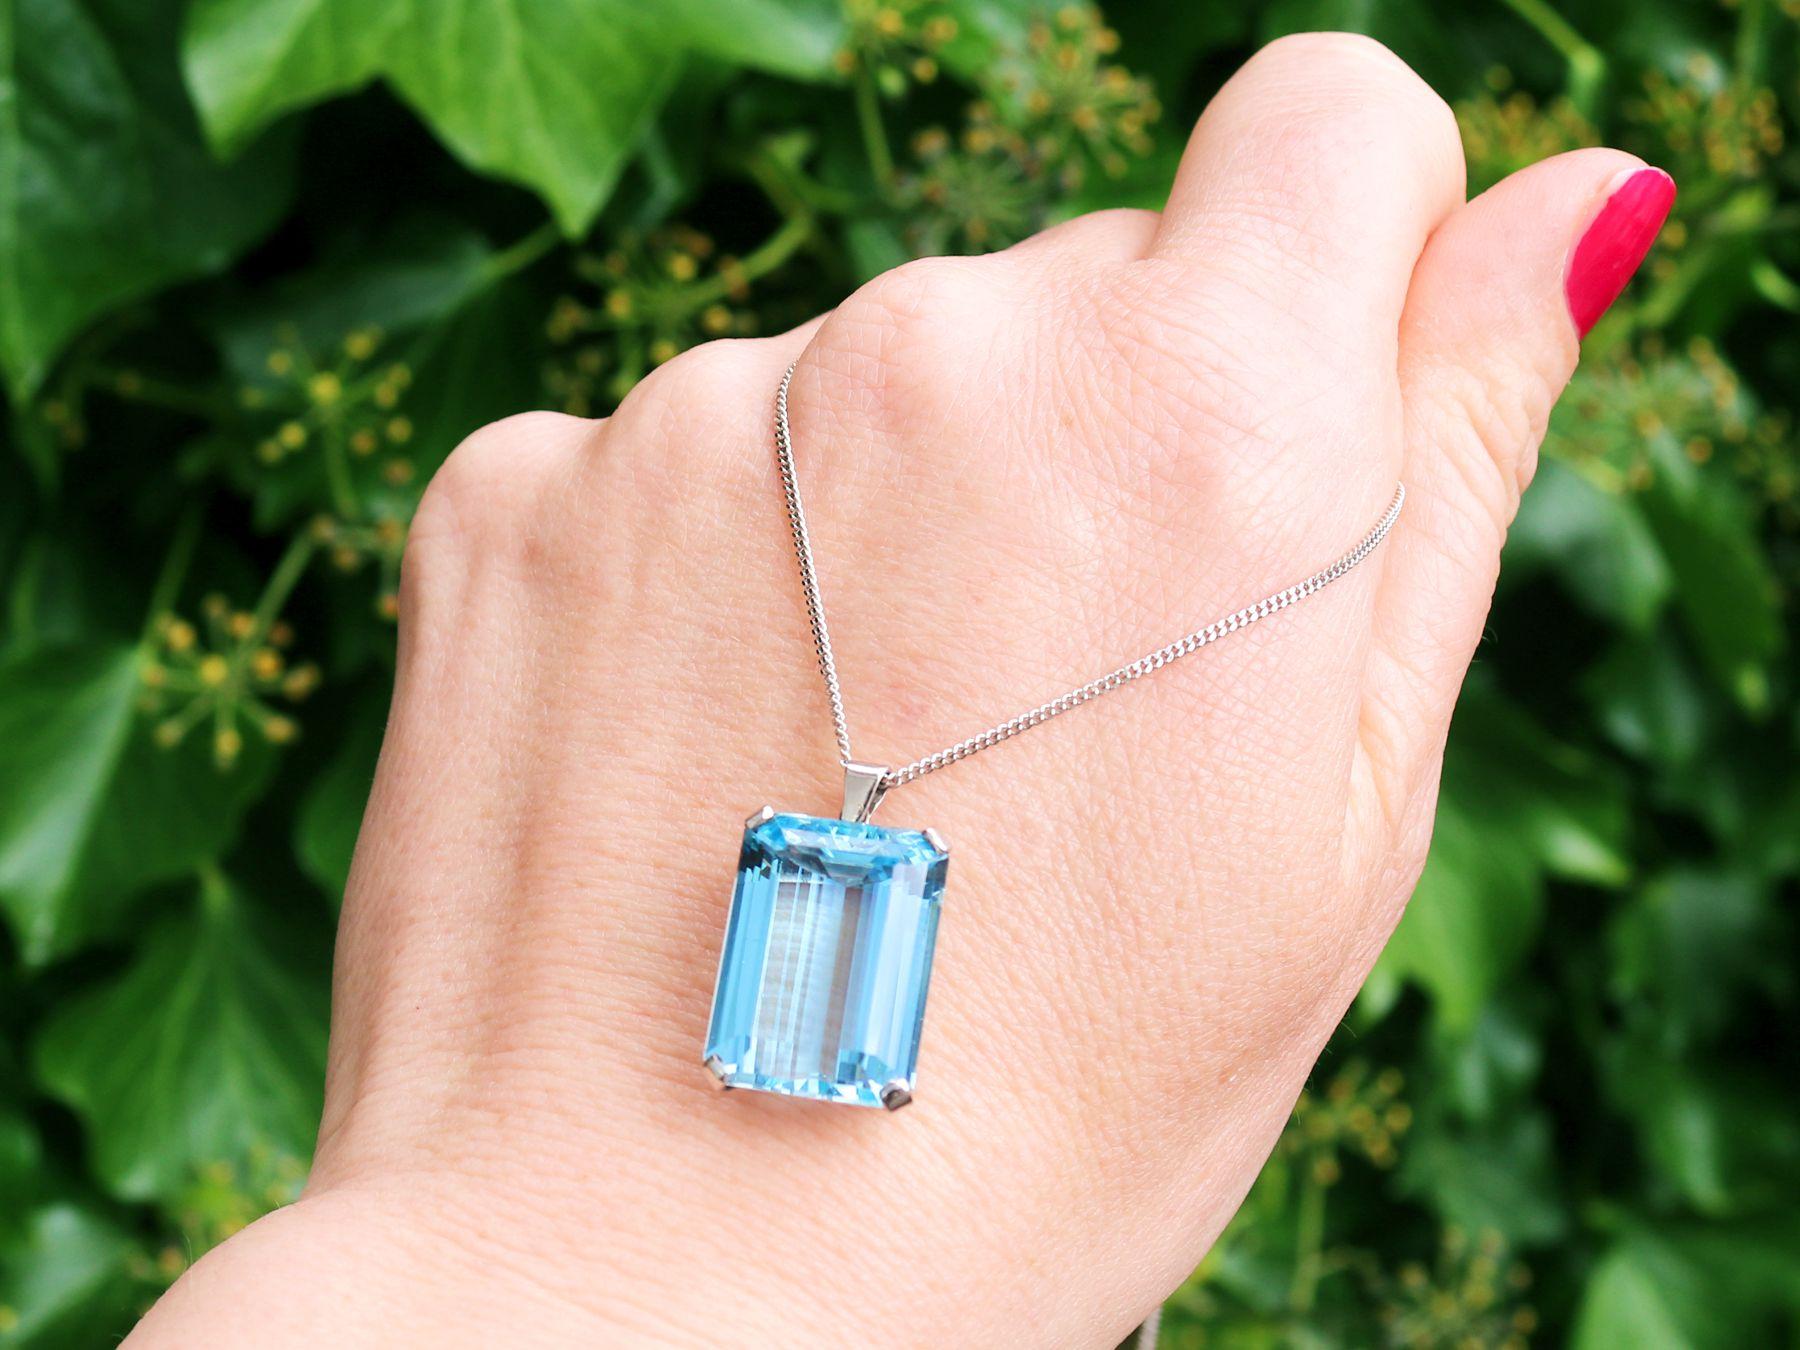 A stunning, fine and impressive vintage 18.27 carat aquamarine and contemporary platinum pendant; part of our diverse vintage jewellery and estate jewelry collections.

This stunning, fine and impressive aquamarine pendant has been crafted in